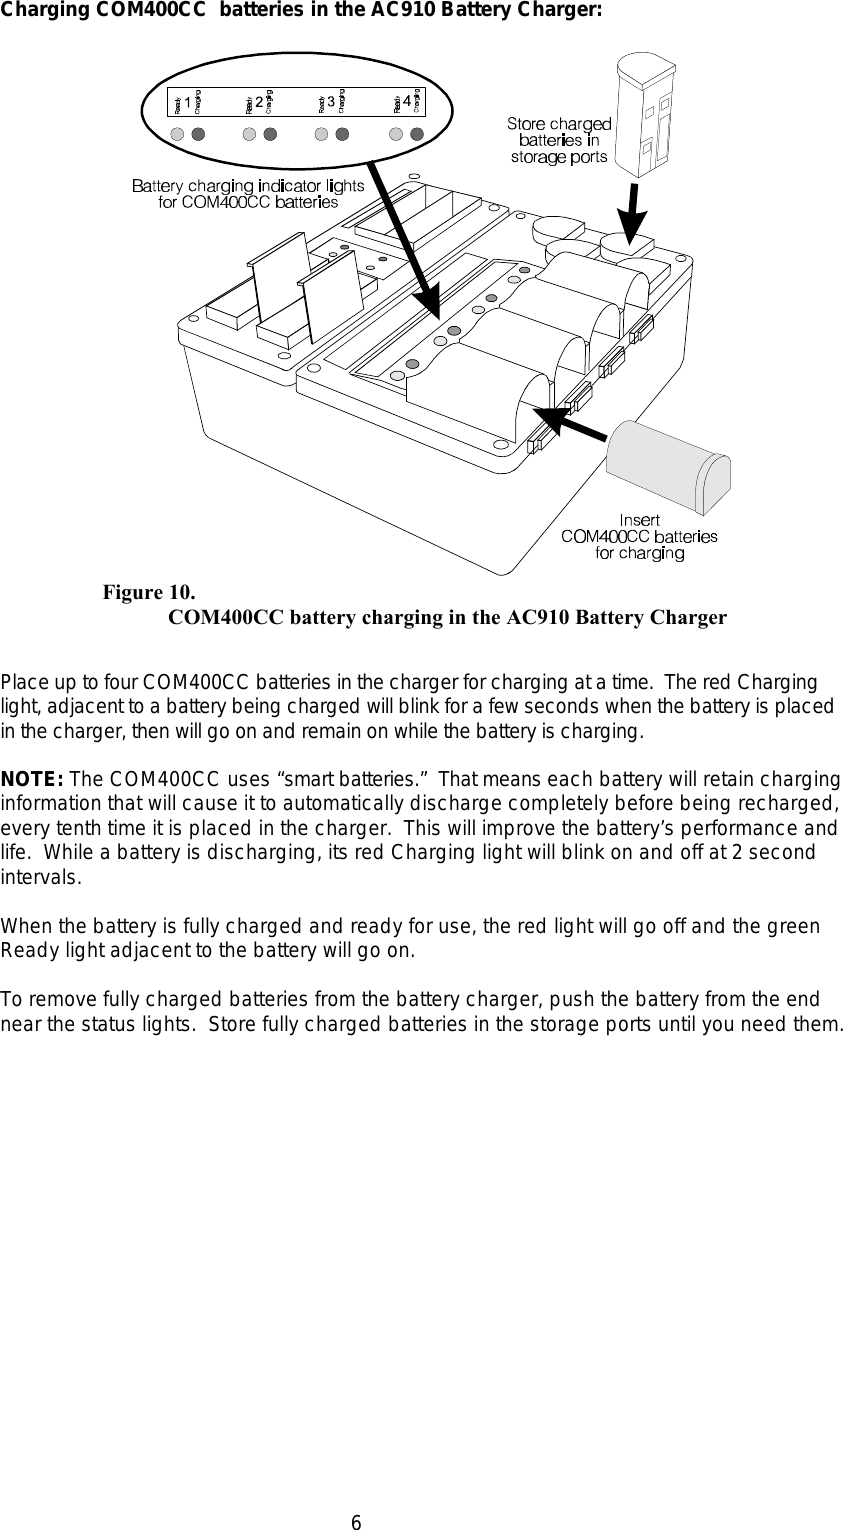 6Figure 10.      COM400CC battery charging in the AC910 Battery ChargerCharging COM400CC  batteries in the AC910 Battery Charger:Place up to four COM400CC batteries in the charger for charging at a time.  The red Charginglight, adjacent to a battery being charged will blink for a few seconds when the battery is placedin the charger, then will go on and remain on while the battery is charging.NOTE: The COM400CC uses “smart batteries.”  That means each battery will retain charginginformation that will cause it to automatically discharge completely before being recharged,every tenth time it is placed in the charger.  This will improve the battery’s performance andlife.  While a battery is discharging, its red Charging light will blink on and off at 2 secondintervals.When the battery is fully charged and ready for use, the red light will go off and the greenReady light adjacent to the battery will go on.To remove fully charged batteries from the battery charger, push the battery from the endnear the status lights.  Store fully charged batteries in the storage ports until you need them.